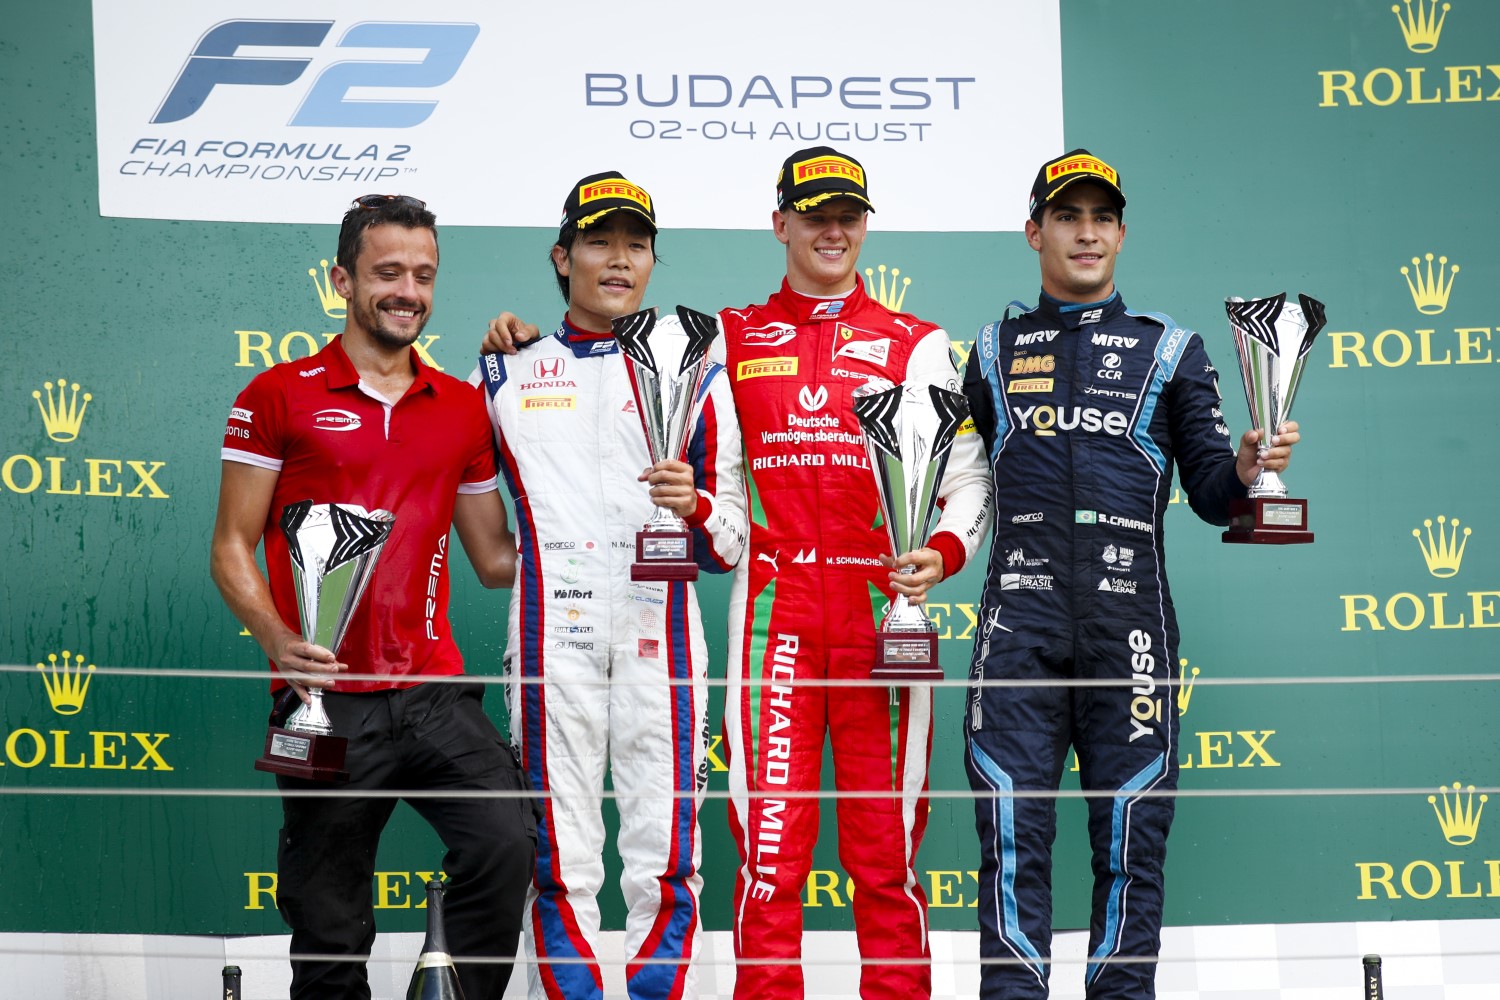 Schumacher gets the middle podium for the first time in F2